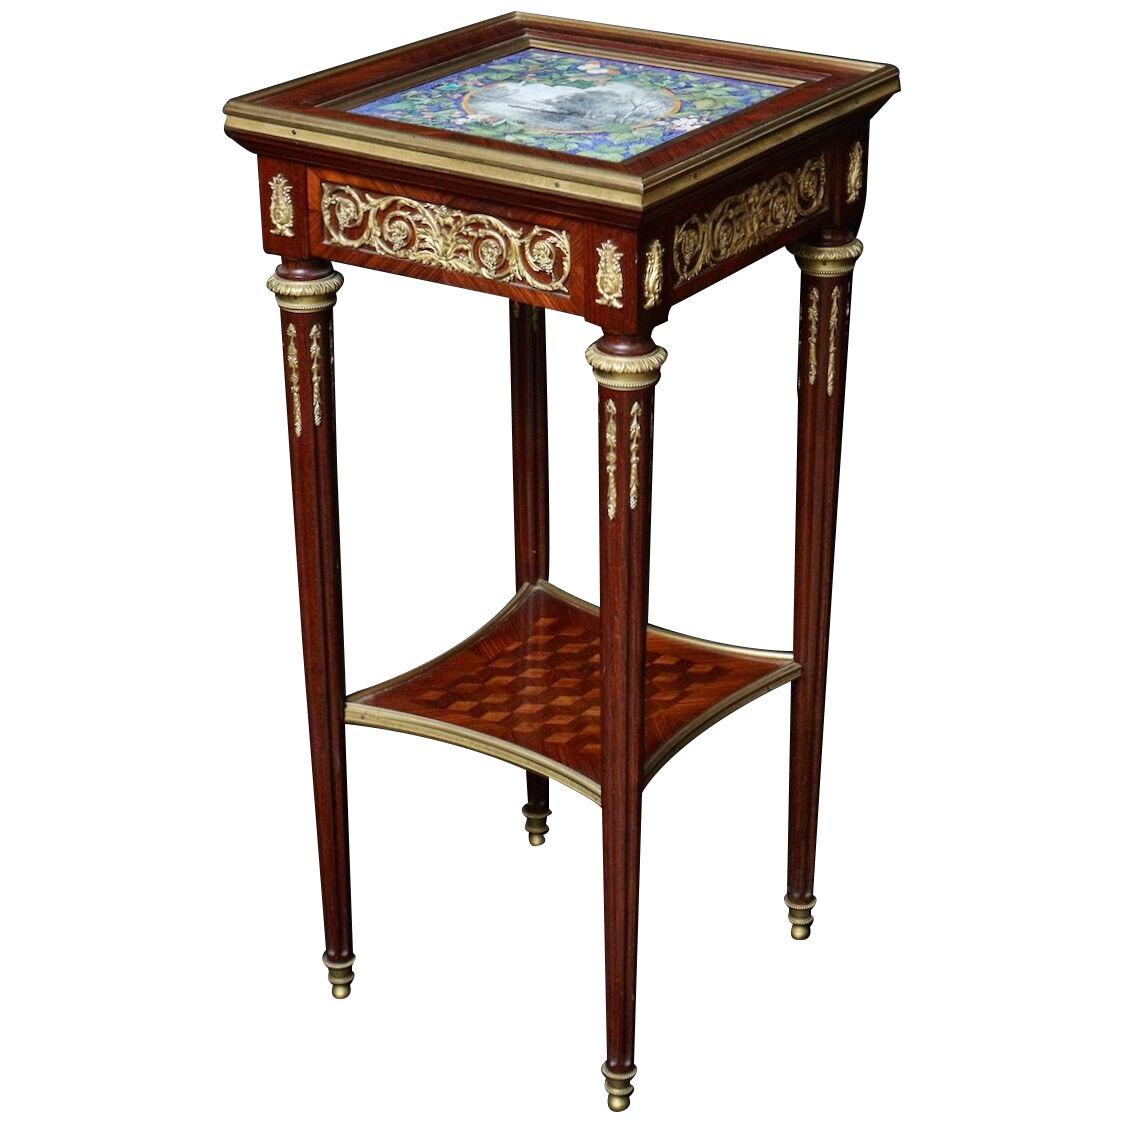 A Very Fine French 19th Century Side-Table by François Linke (1855-1946)